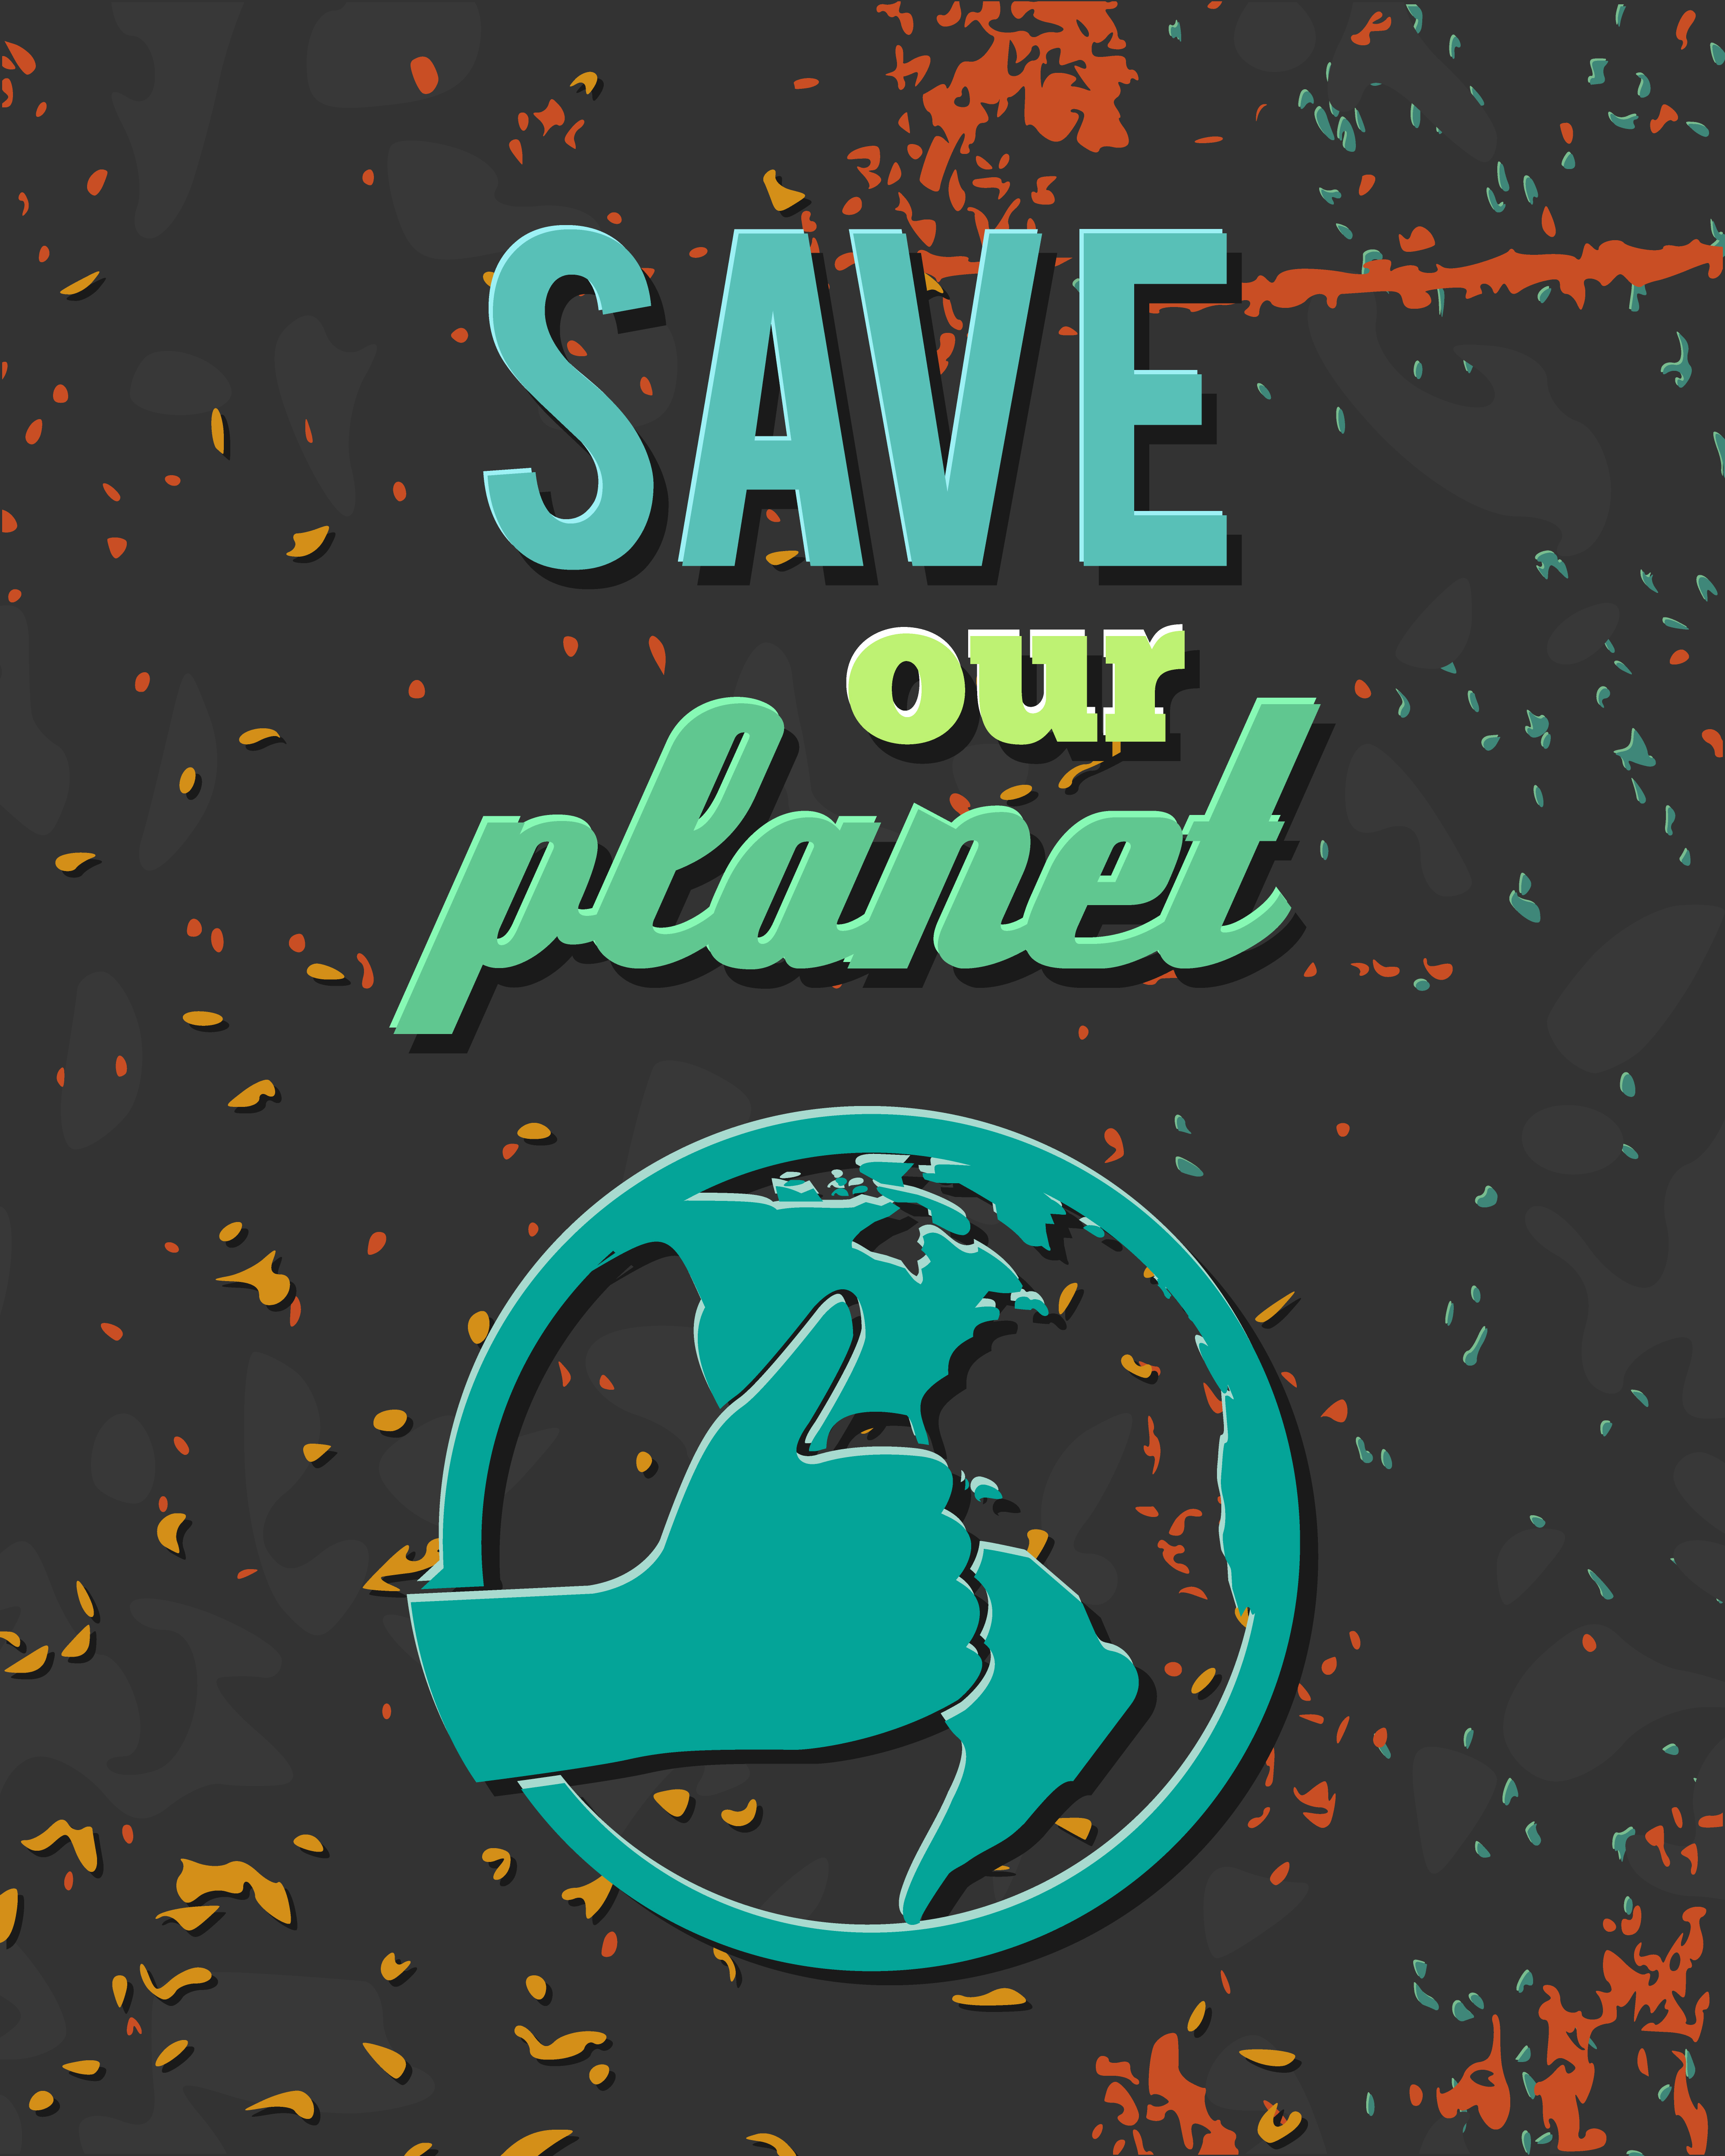 save-planet-globe-poster-460644-vector-art-at-vecteezy